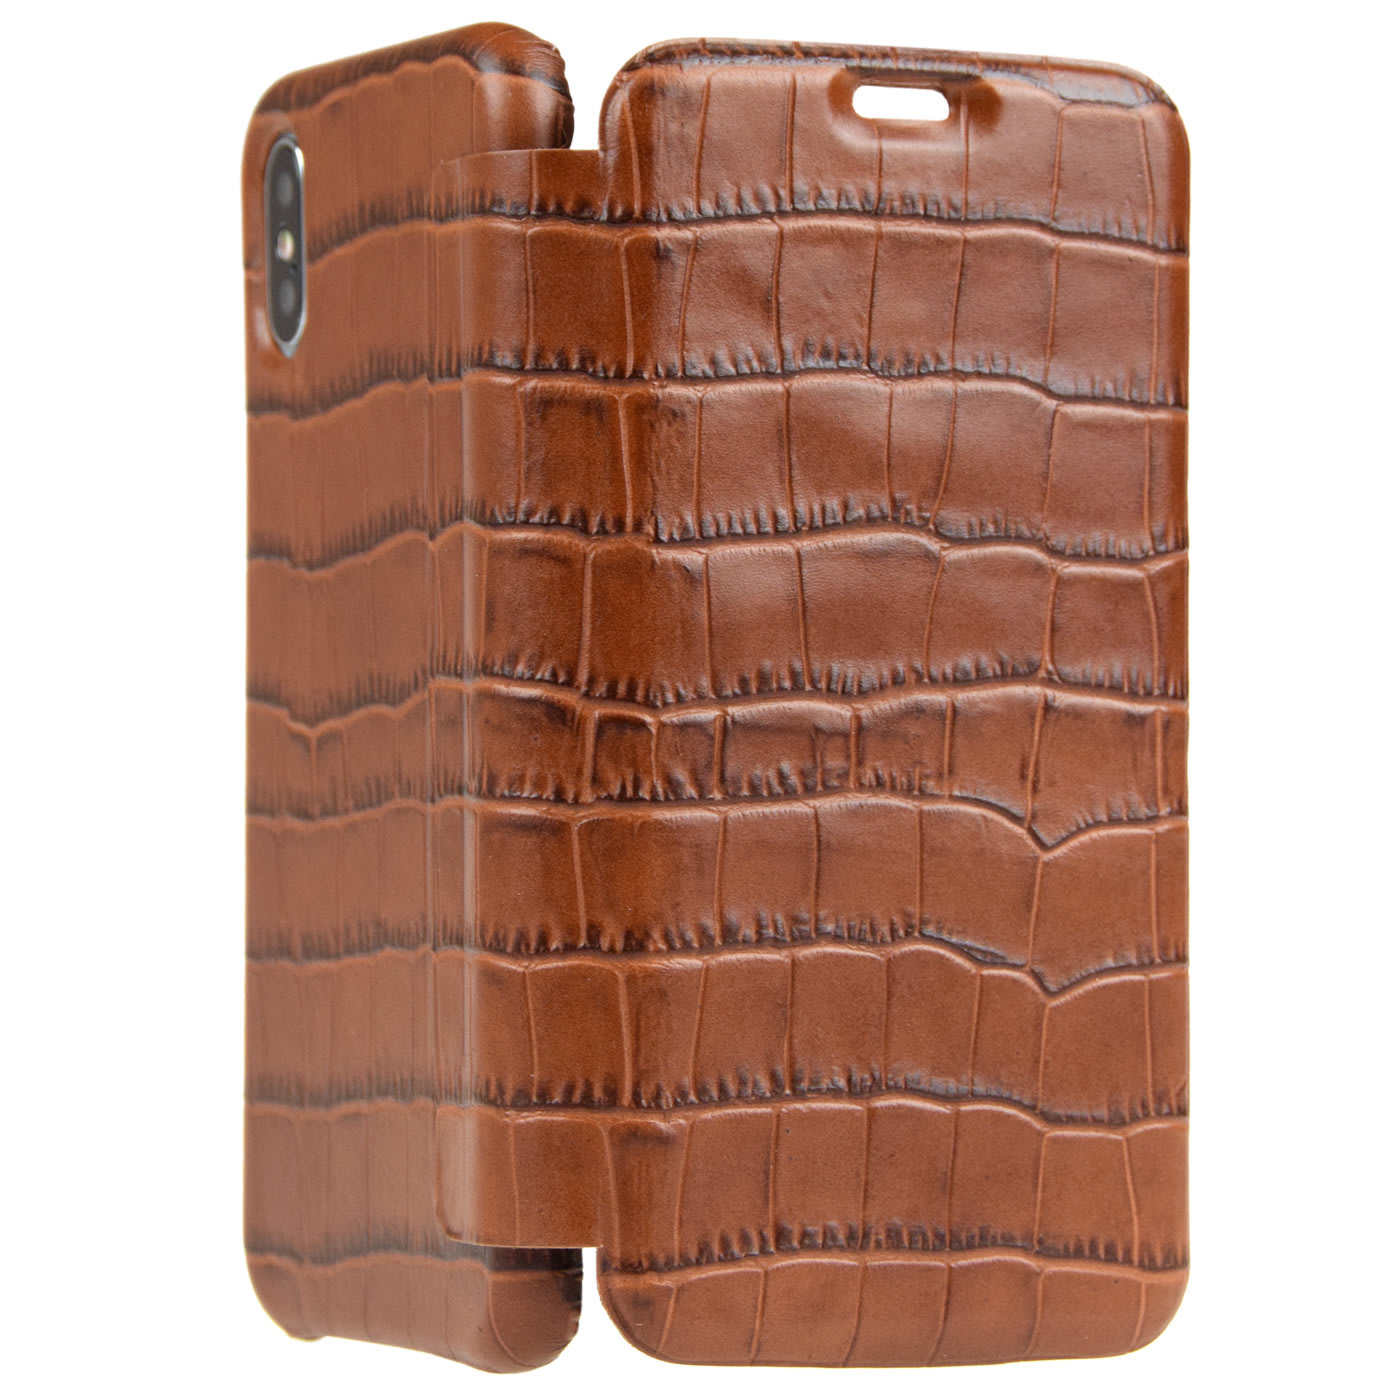 Crocco Brown Leather Booklet Case - Carastyle